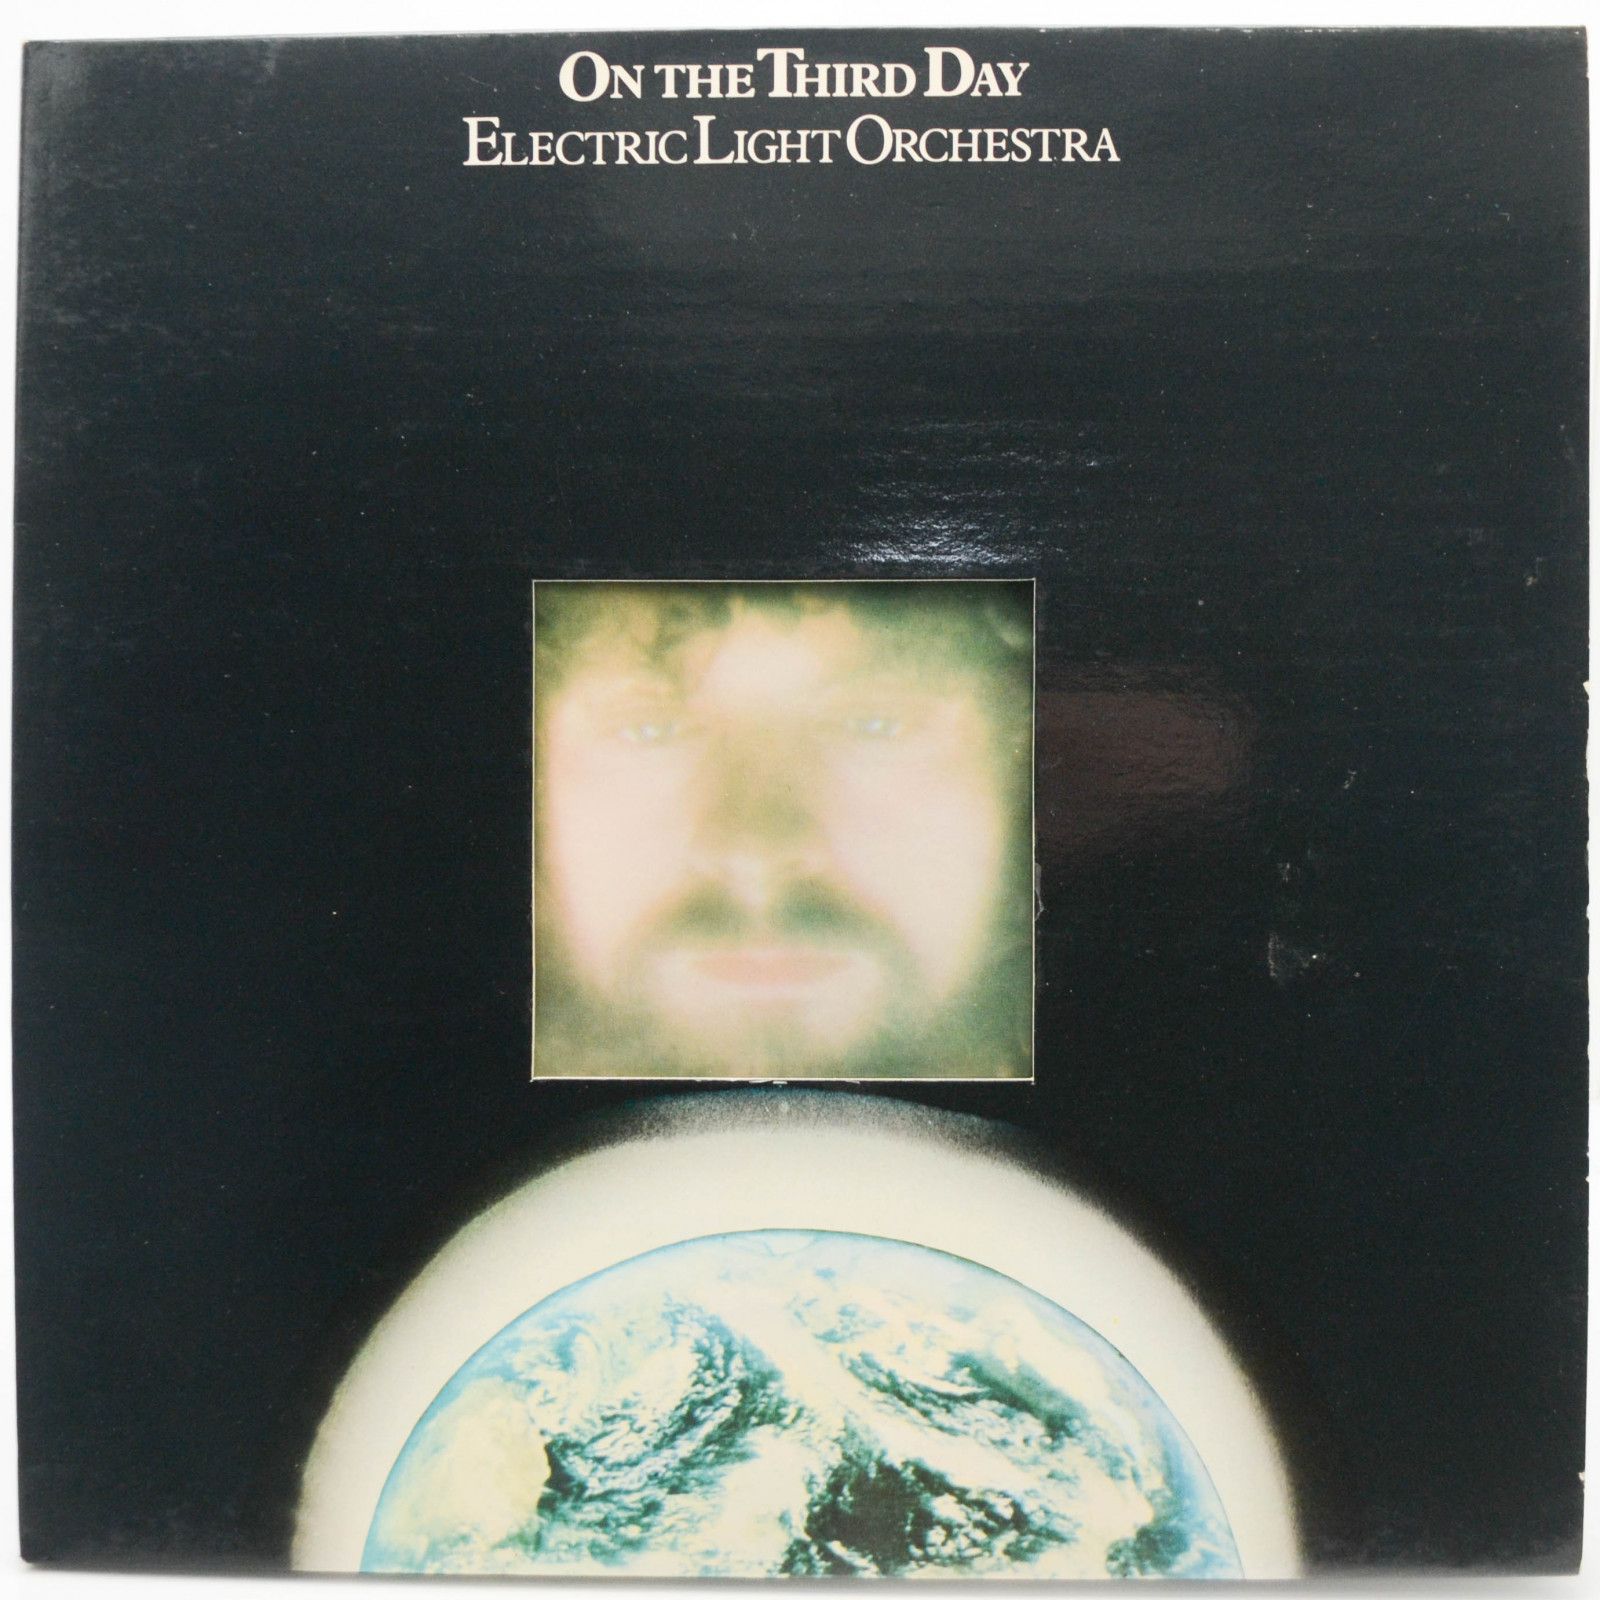 Electric Light Orchestra — On The Third Day, 1973